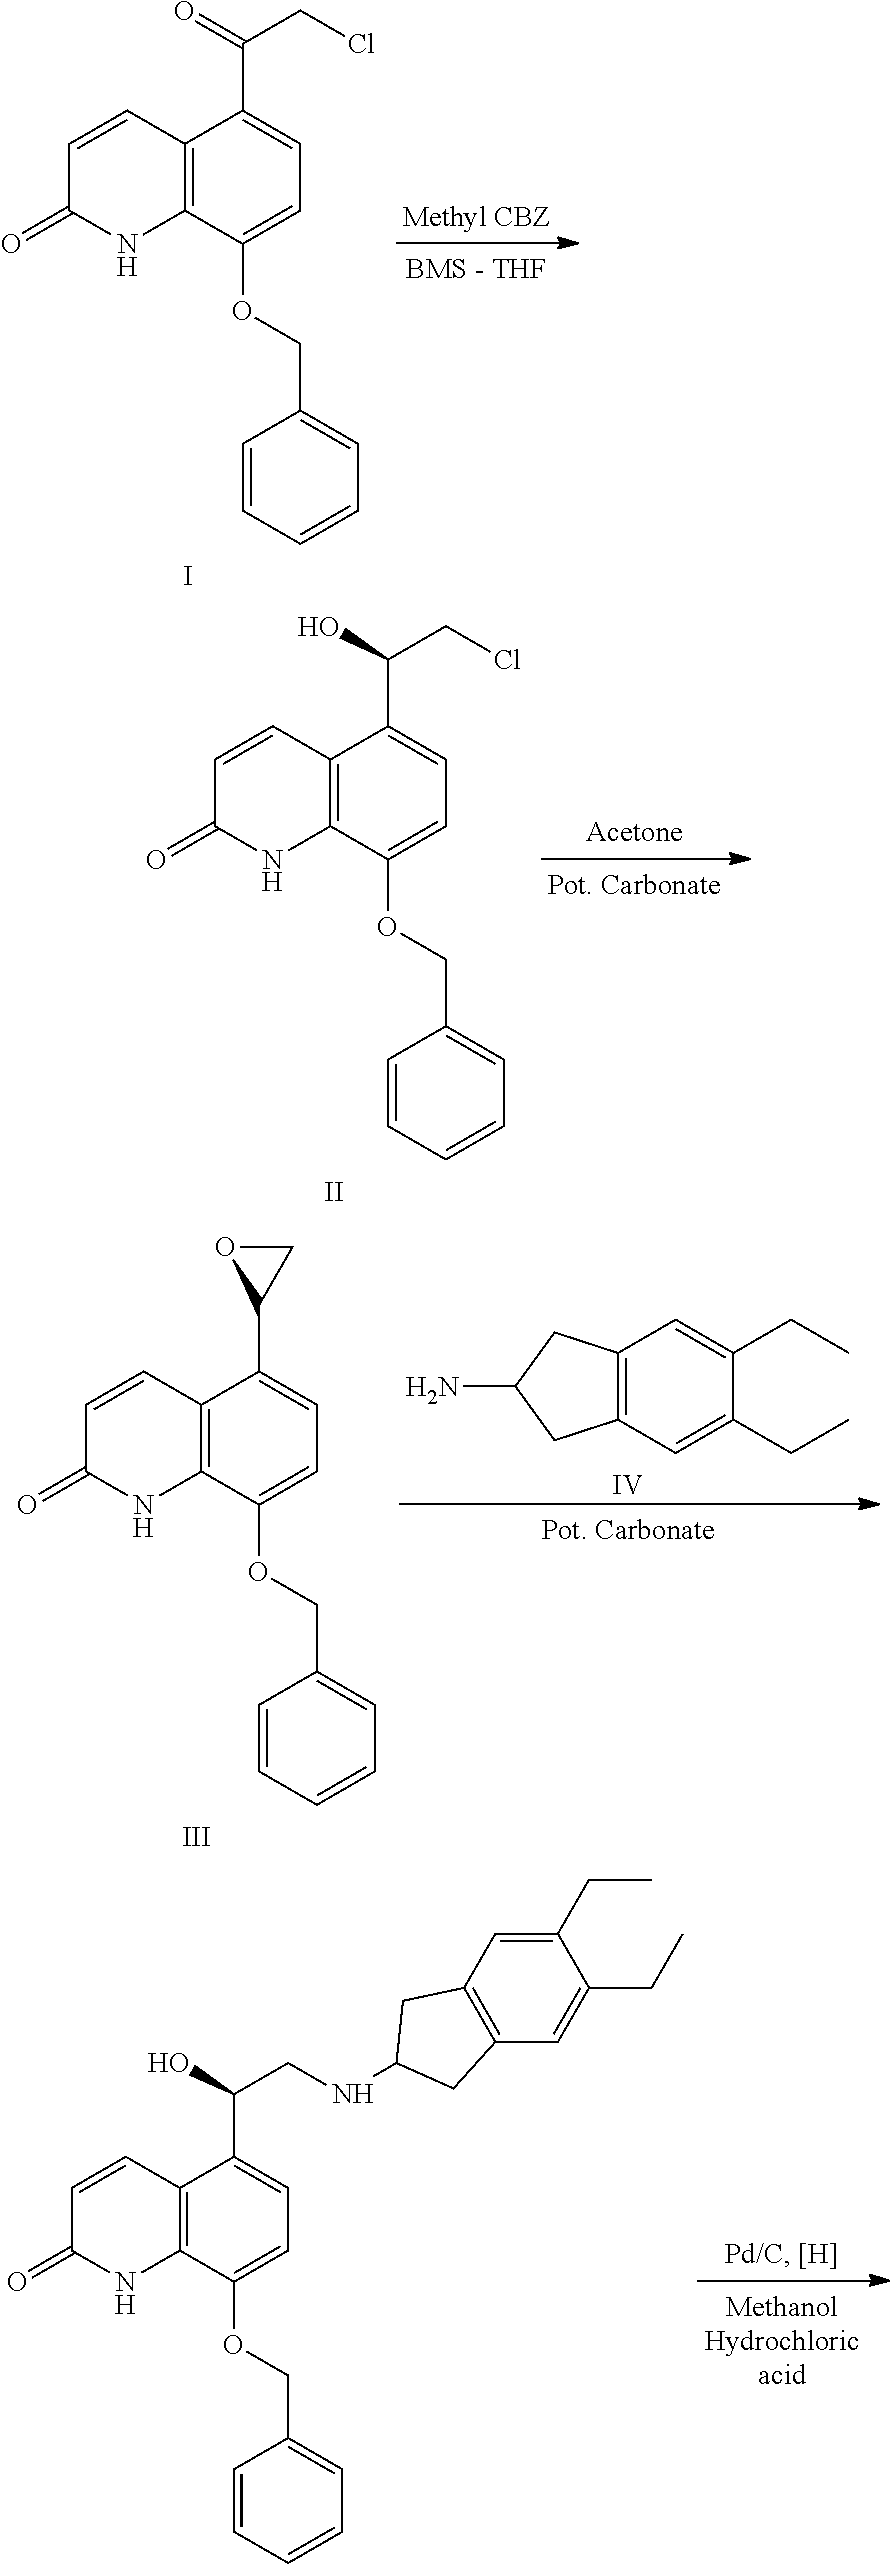 Process for preparation of indacaterol or its pharmaceutically acceptable salts